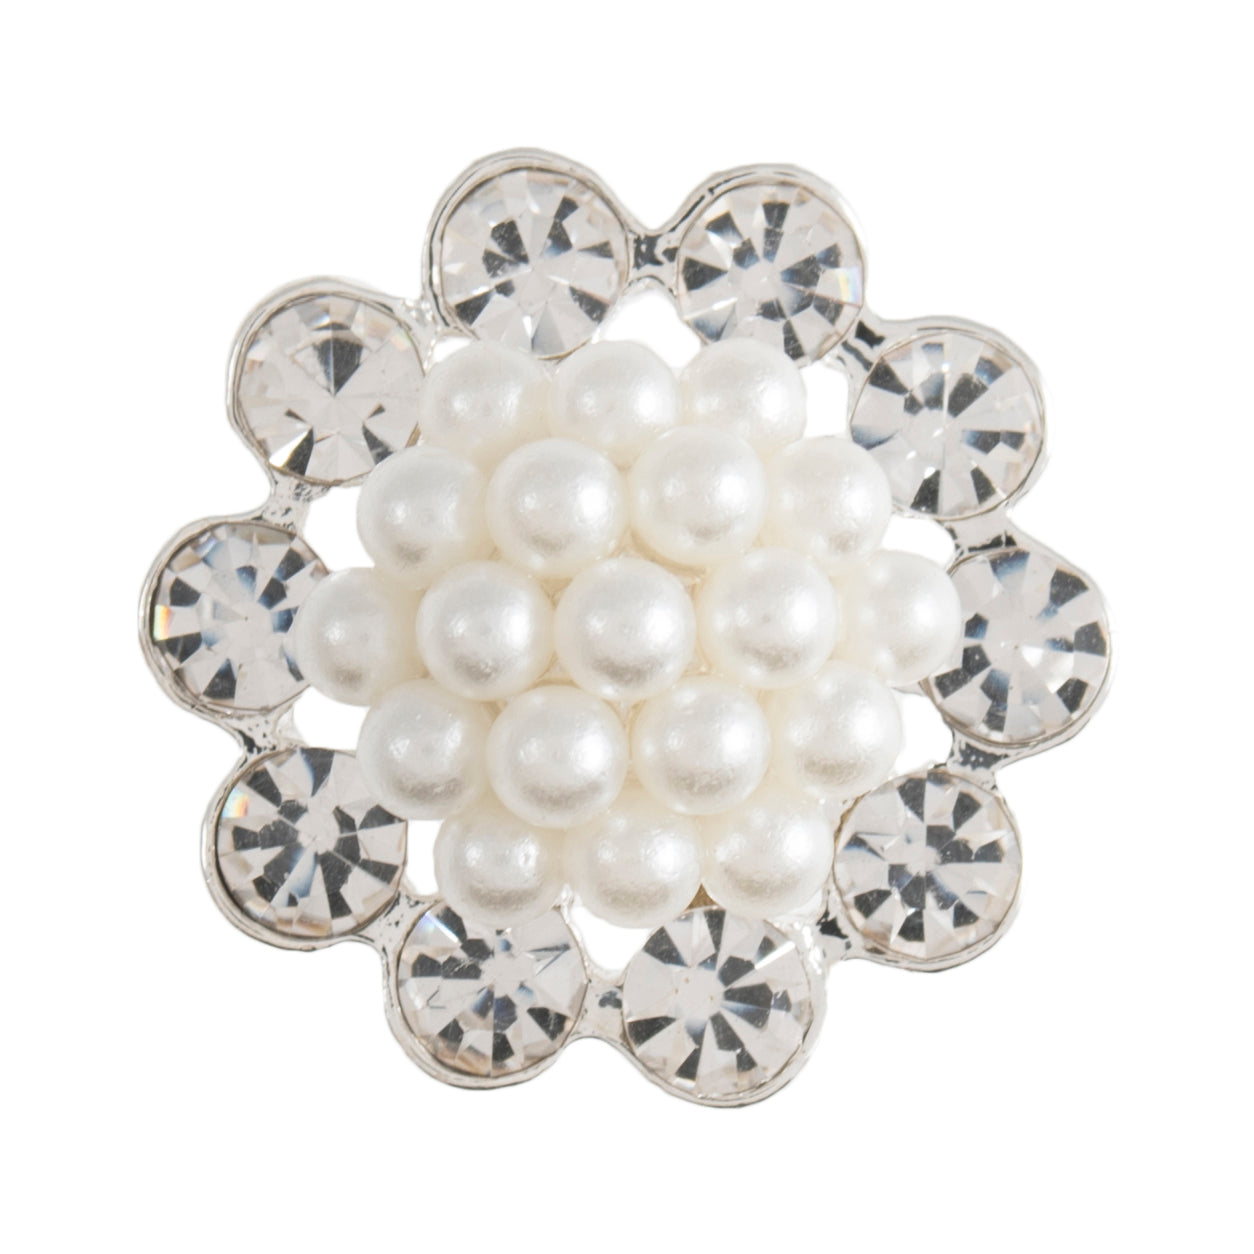 Diamante Pearl Cluster Flower Shank Button - 19mm - Silver